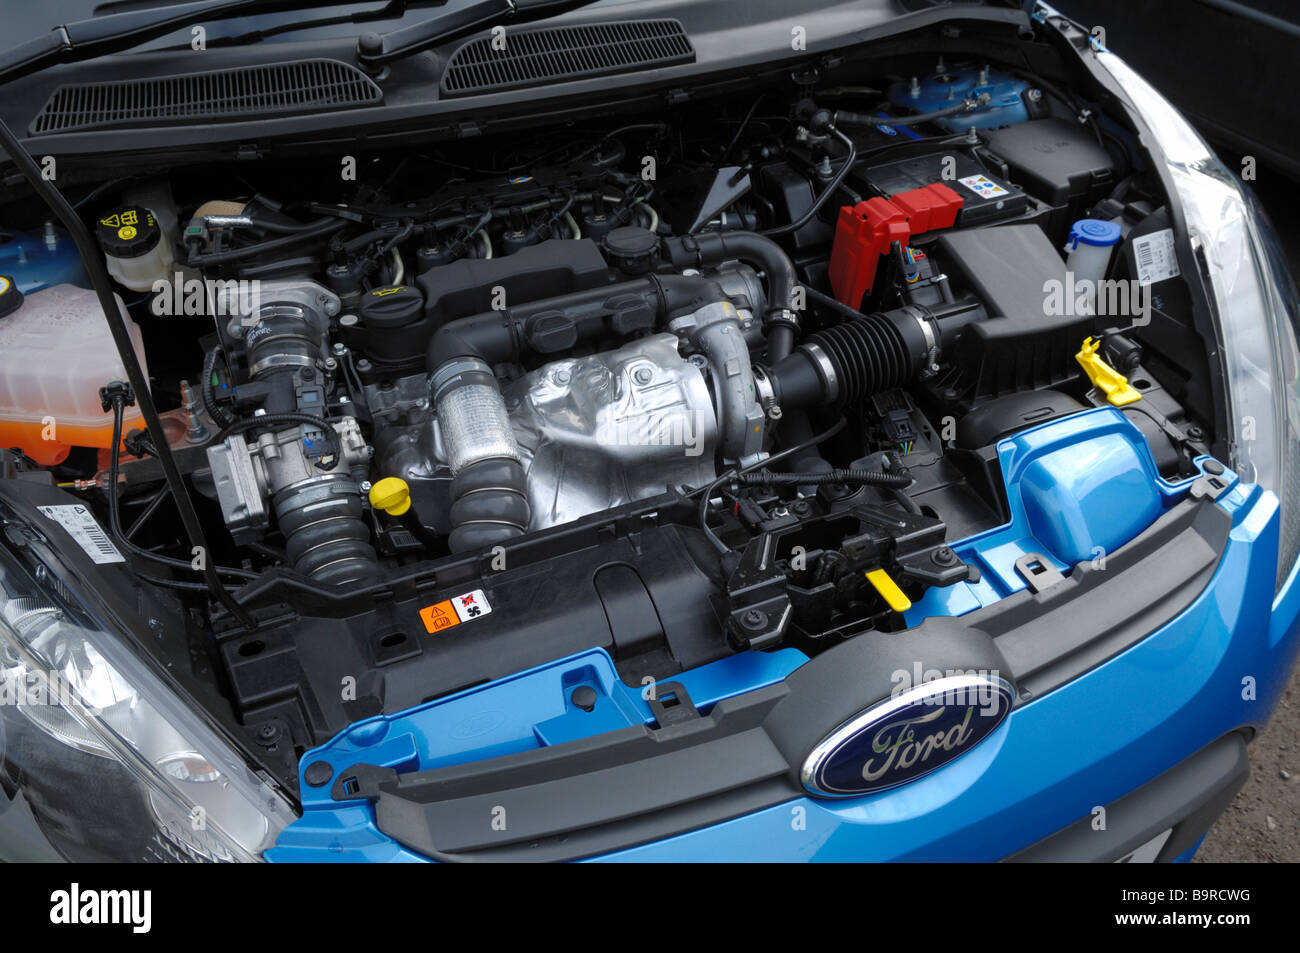 The diesel engine from the Ford Fiesta 1.6 TDCi ECOnetic, one of the  greenest cars available in Europe at it's launch in 2009 producing only  98g/km CO2 with a combined fuel consumption